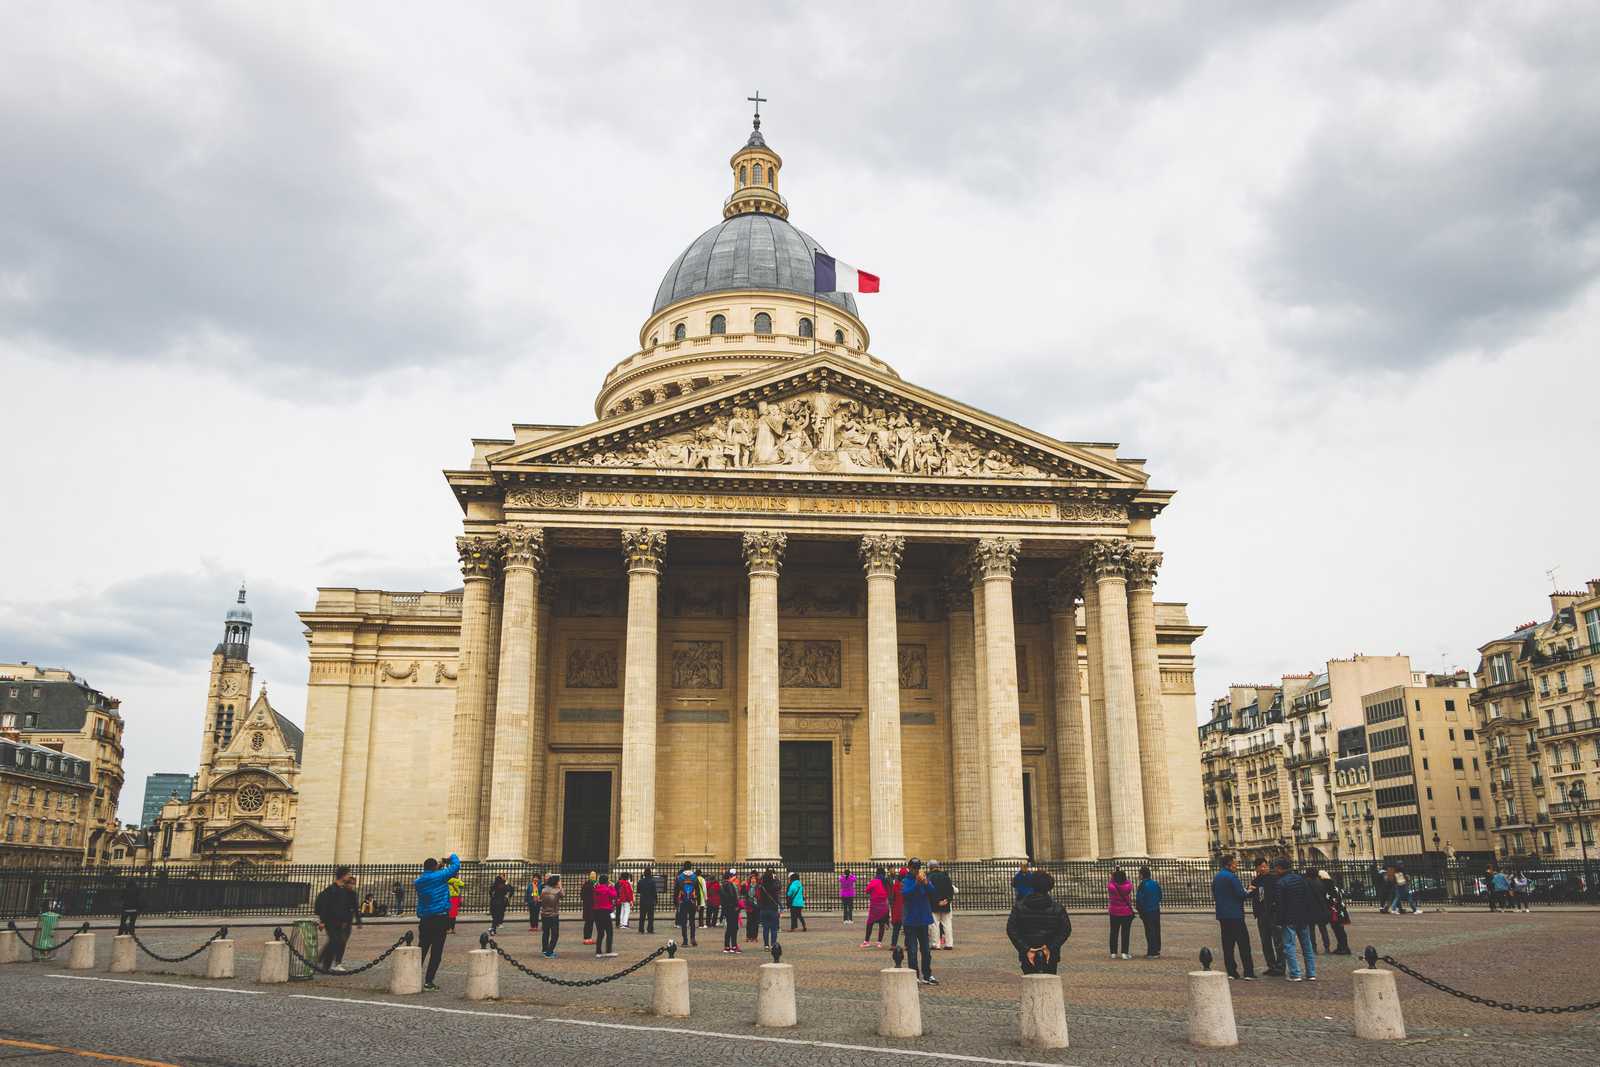 Looking up at the massive edifice of the Panthéon, Romanesque columns towering up from the plaza that surrounds it, below a massive dome behind prominent French flag